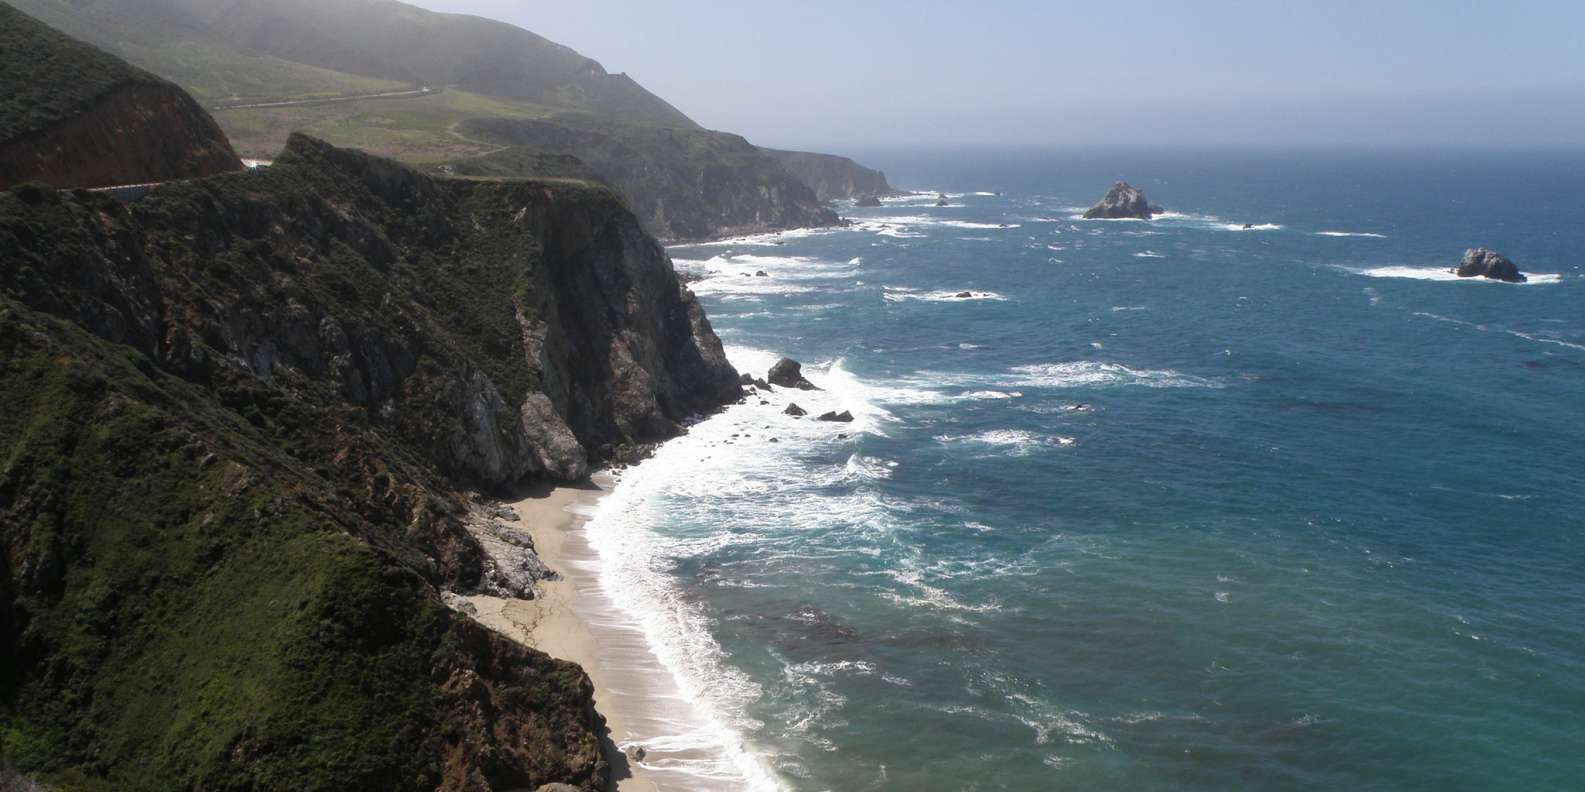 things to do in Carmel-by-the-Sea